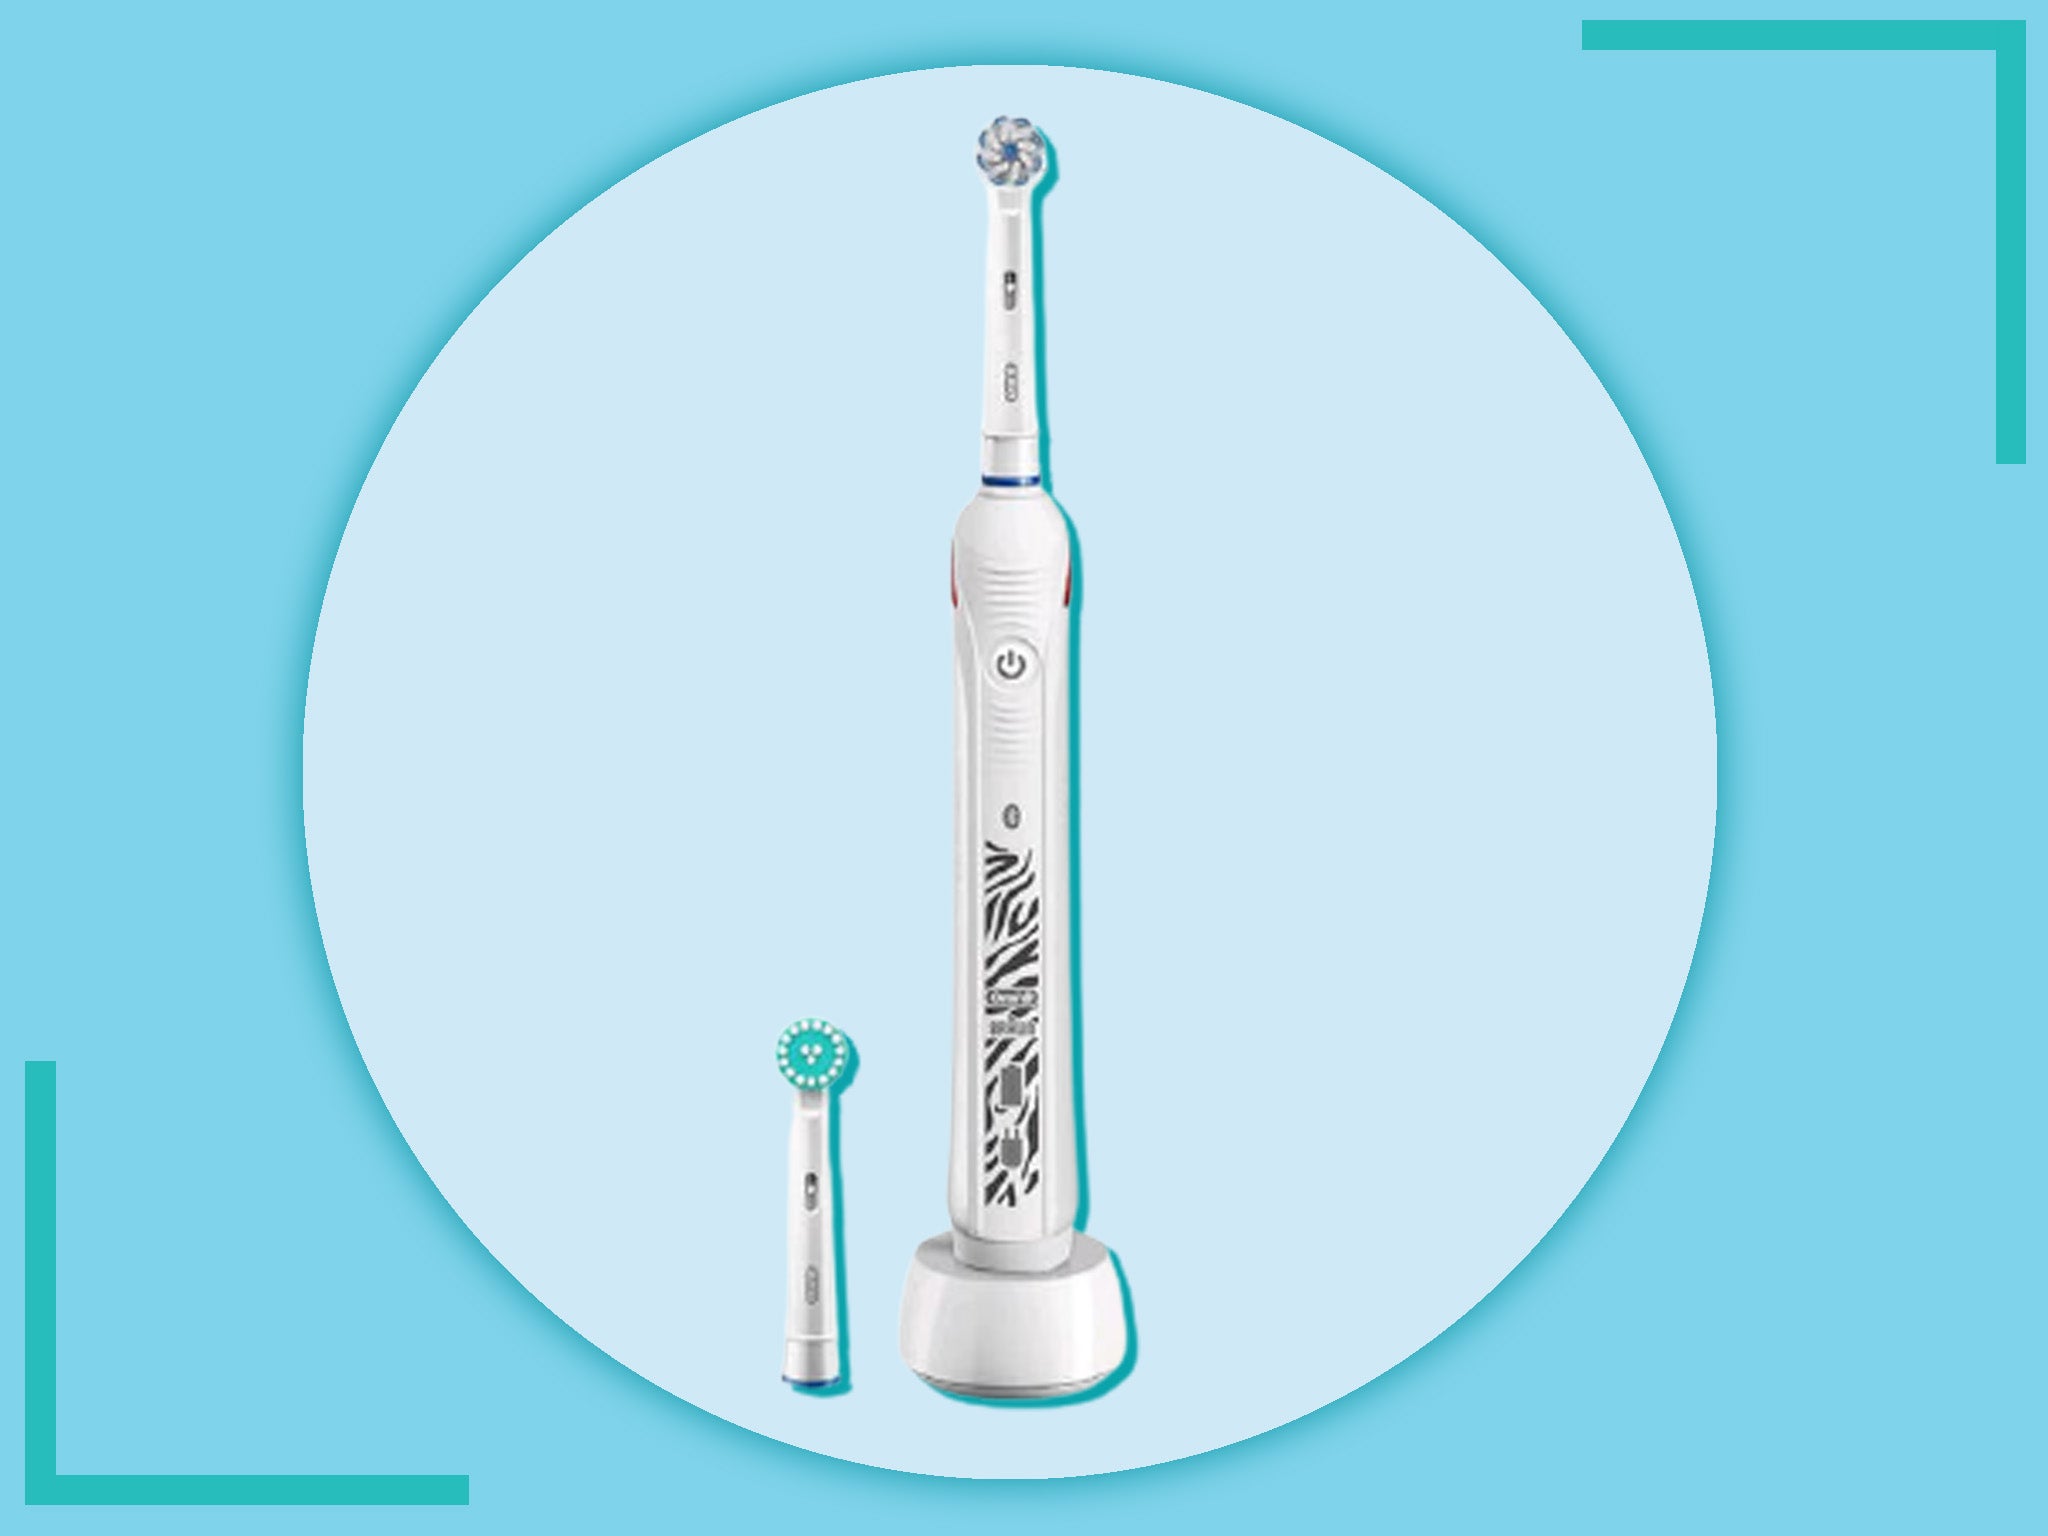 The brush comes with a head that’s designed to clean around orthodontics